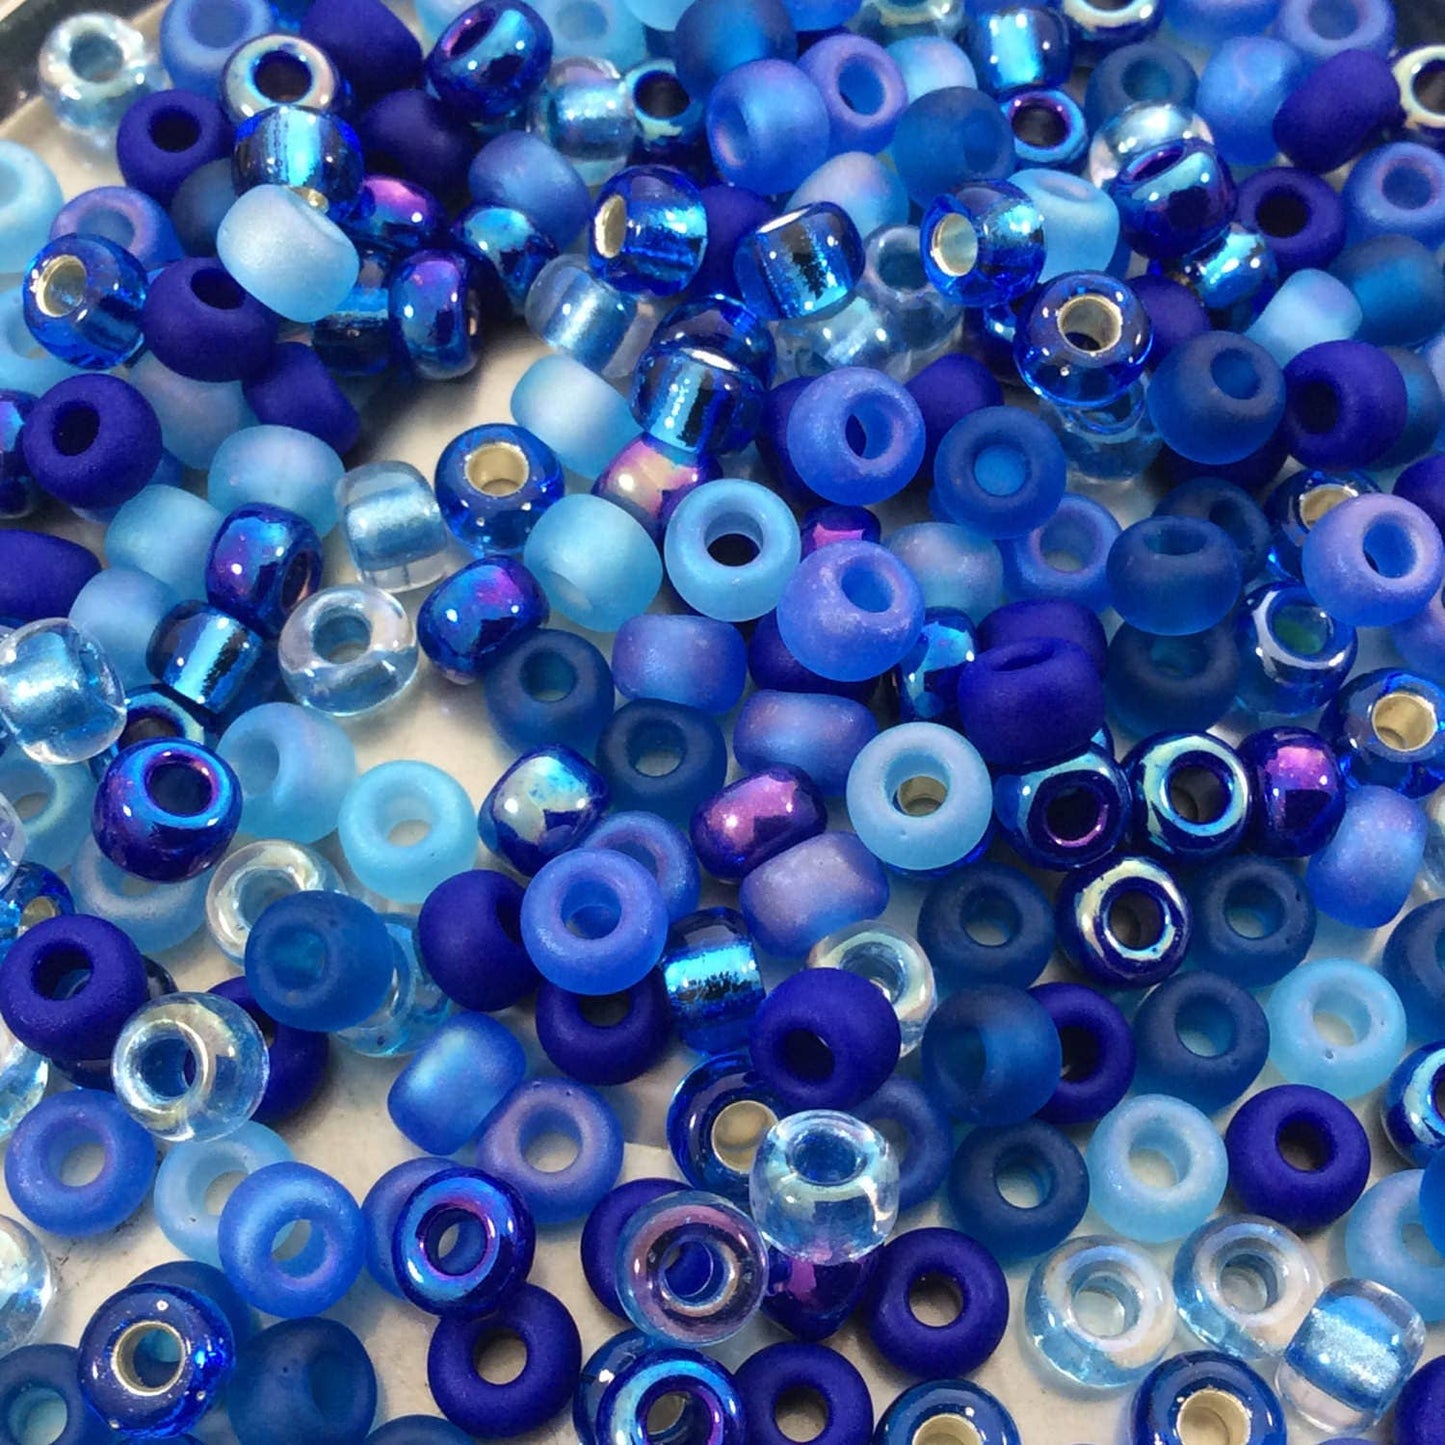 Size 6/0 Assorted Finish Blue Tone Mix Genuine Miyuki Glass Seed Beads - Sold by 20 Gram Tubes (Approx. 200 Beads per Tube) - (6-9MIX02)